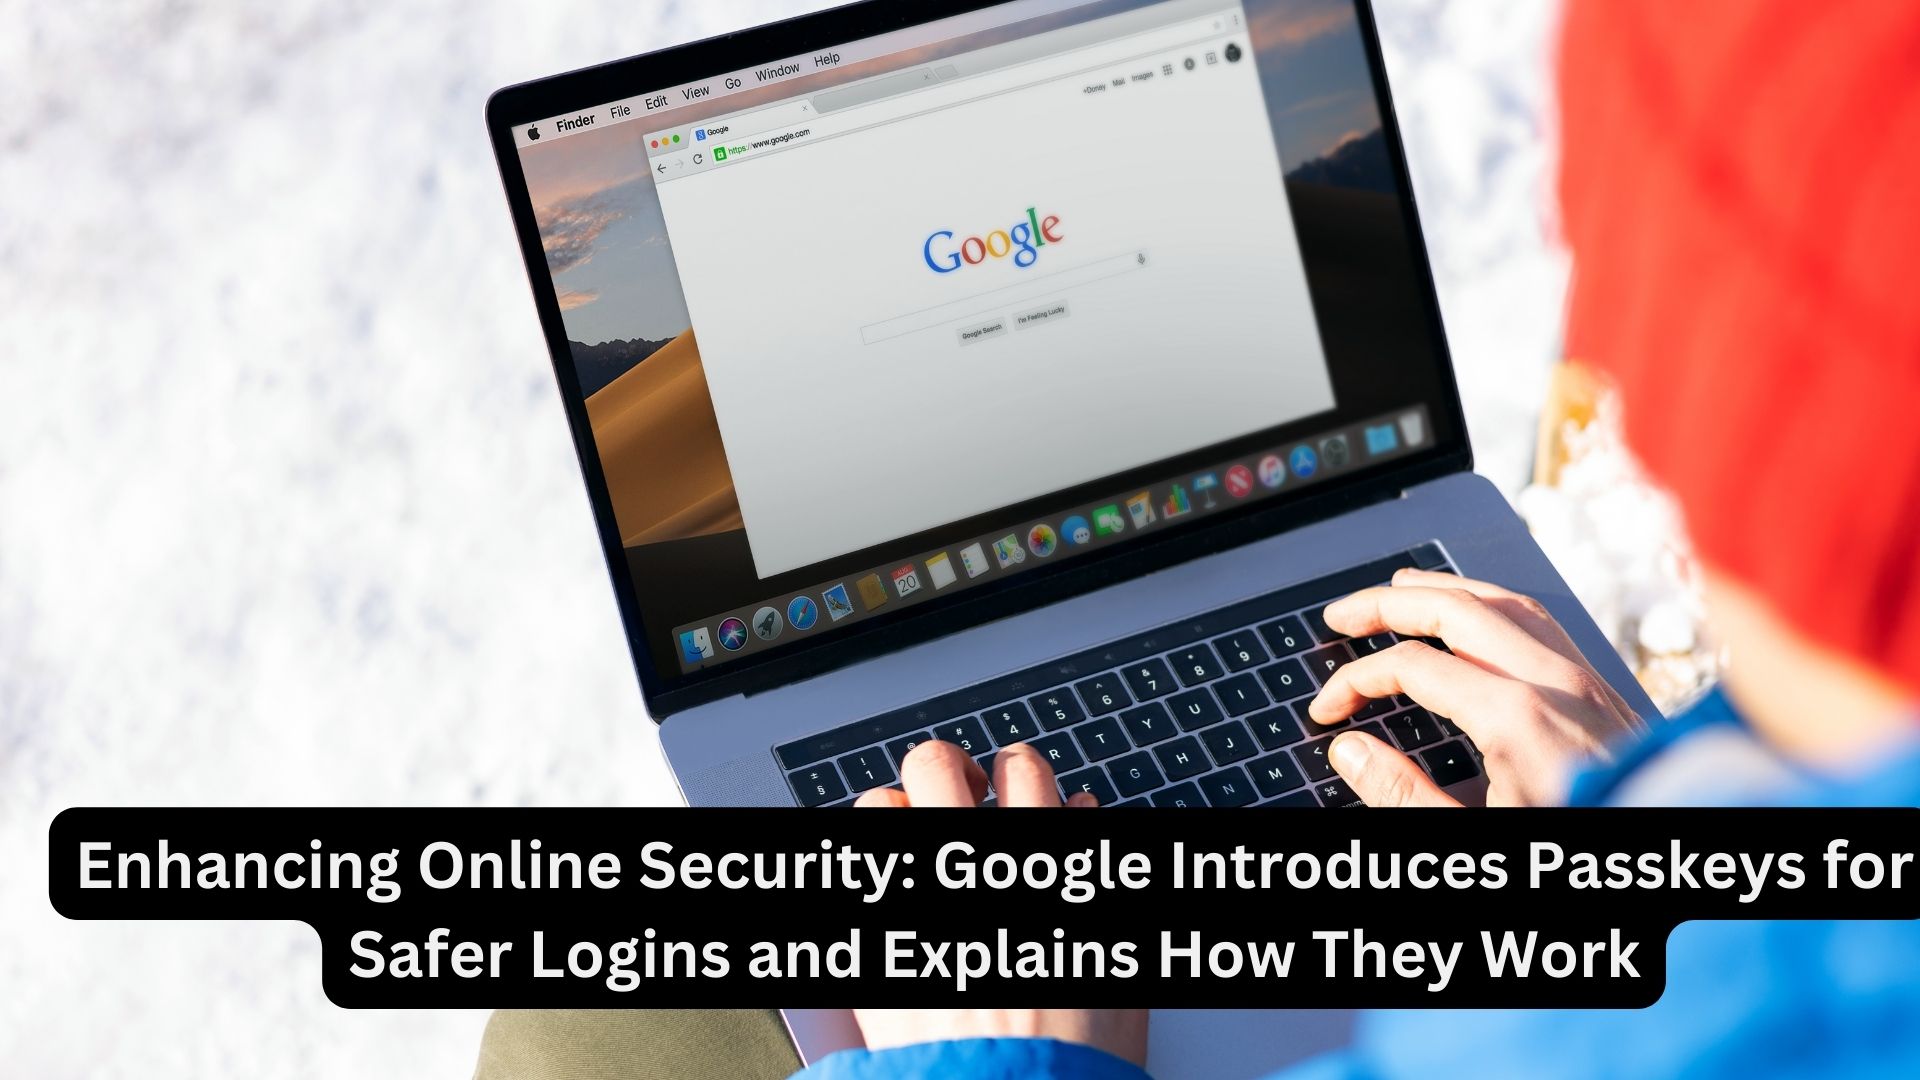 Enhancing Online Security: Google Introduces Passkeys for Safer Logins and Explains How They Work